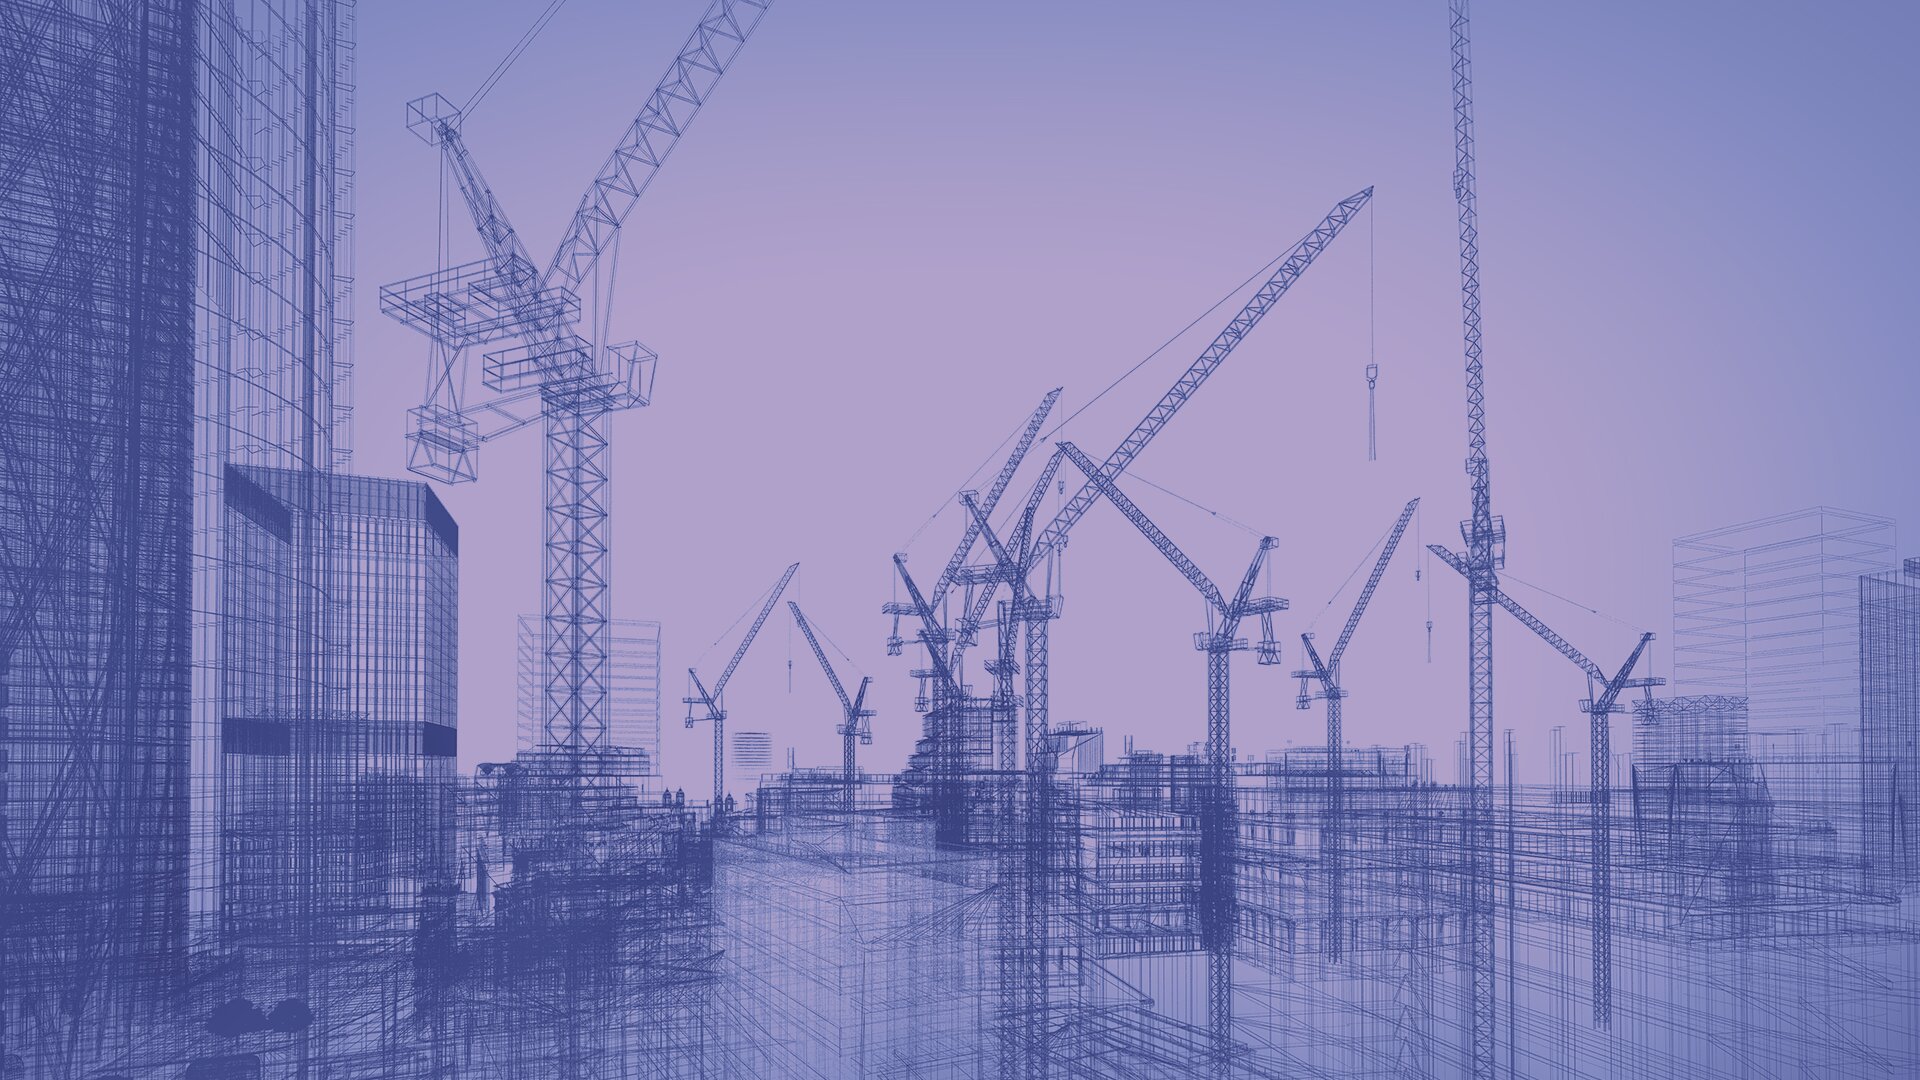 Construction and infrastructure rely on data